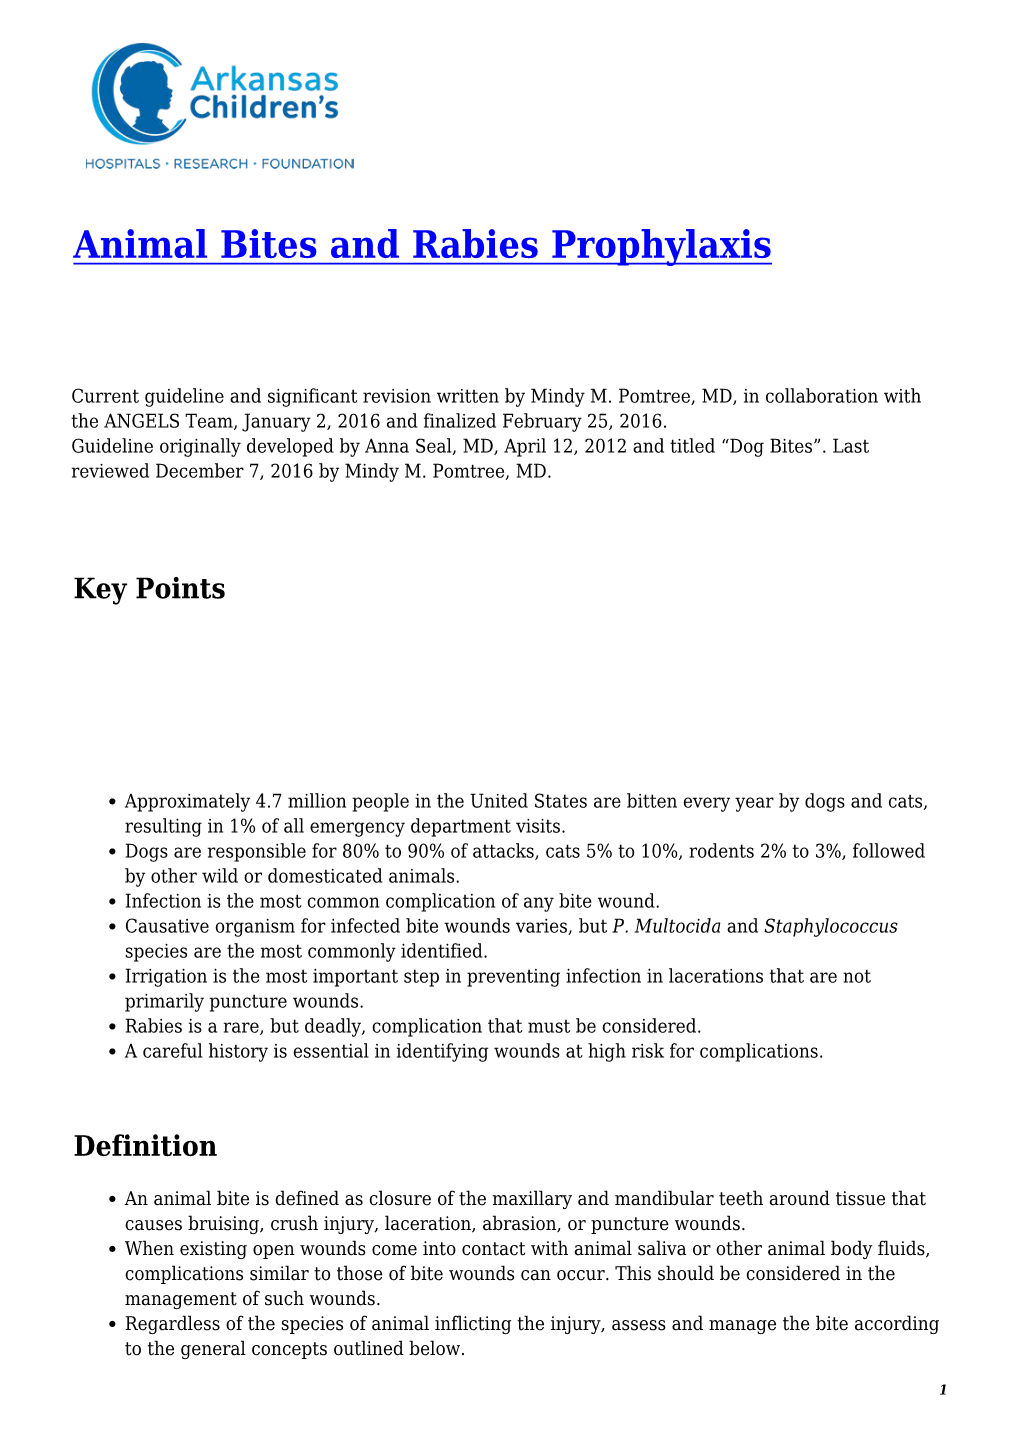 Animal Bites and Rabies Prophylaxis